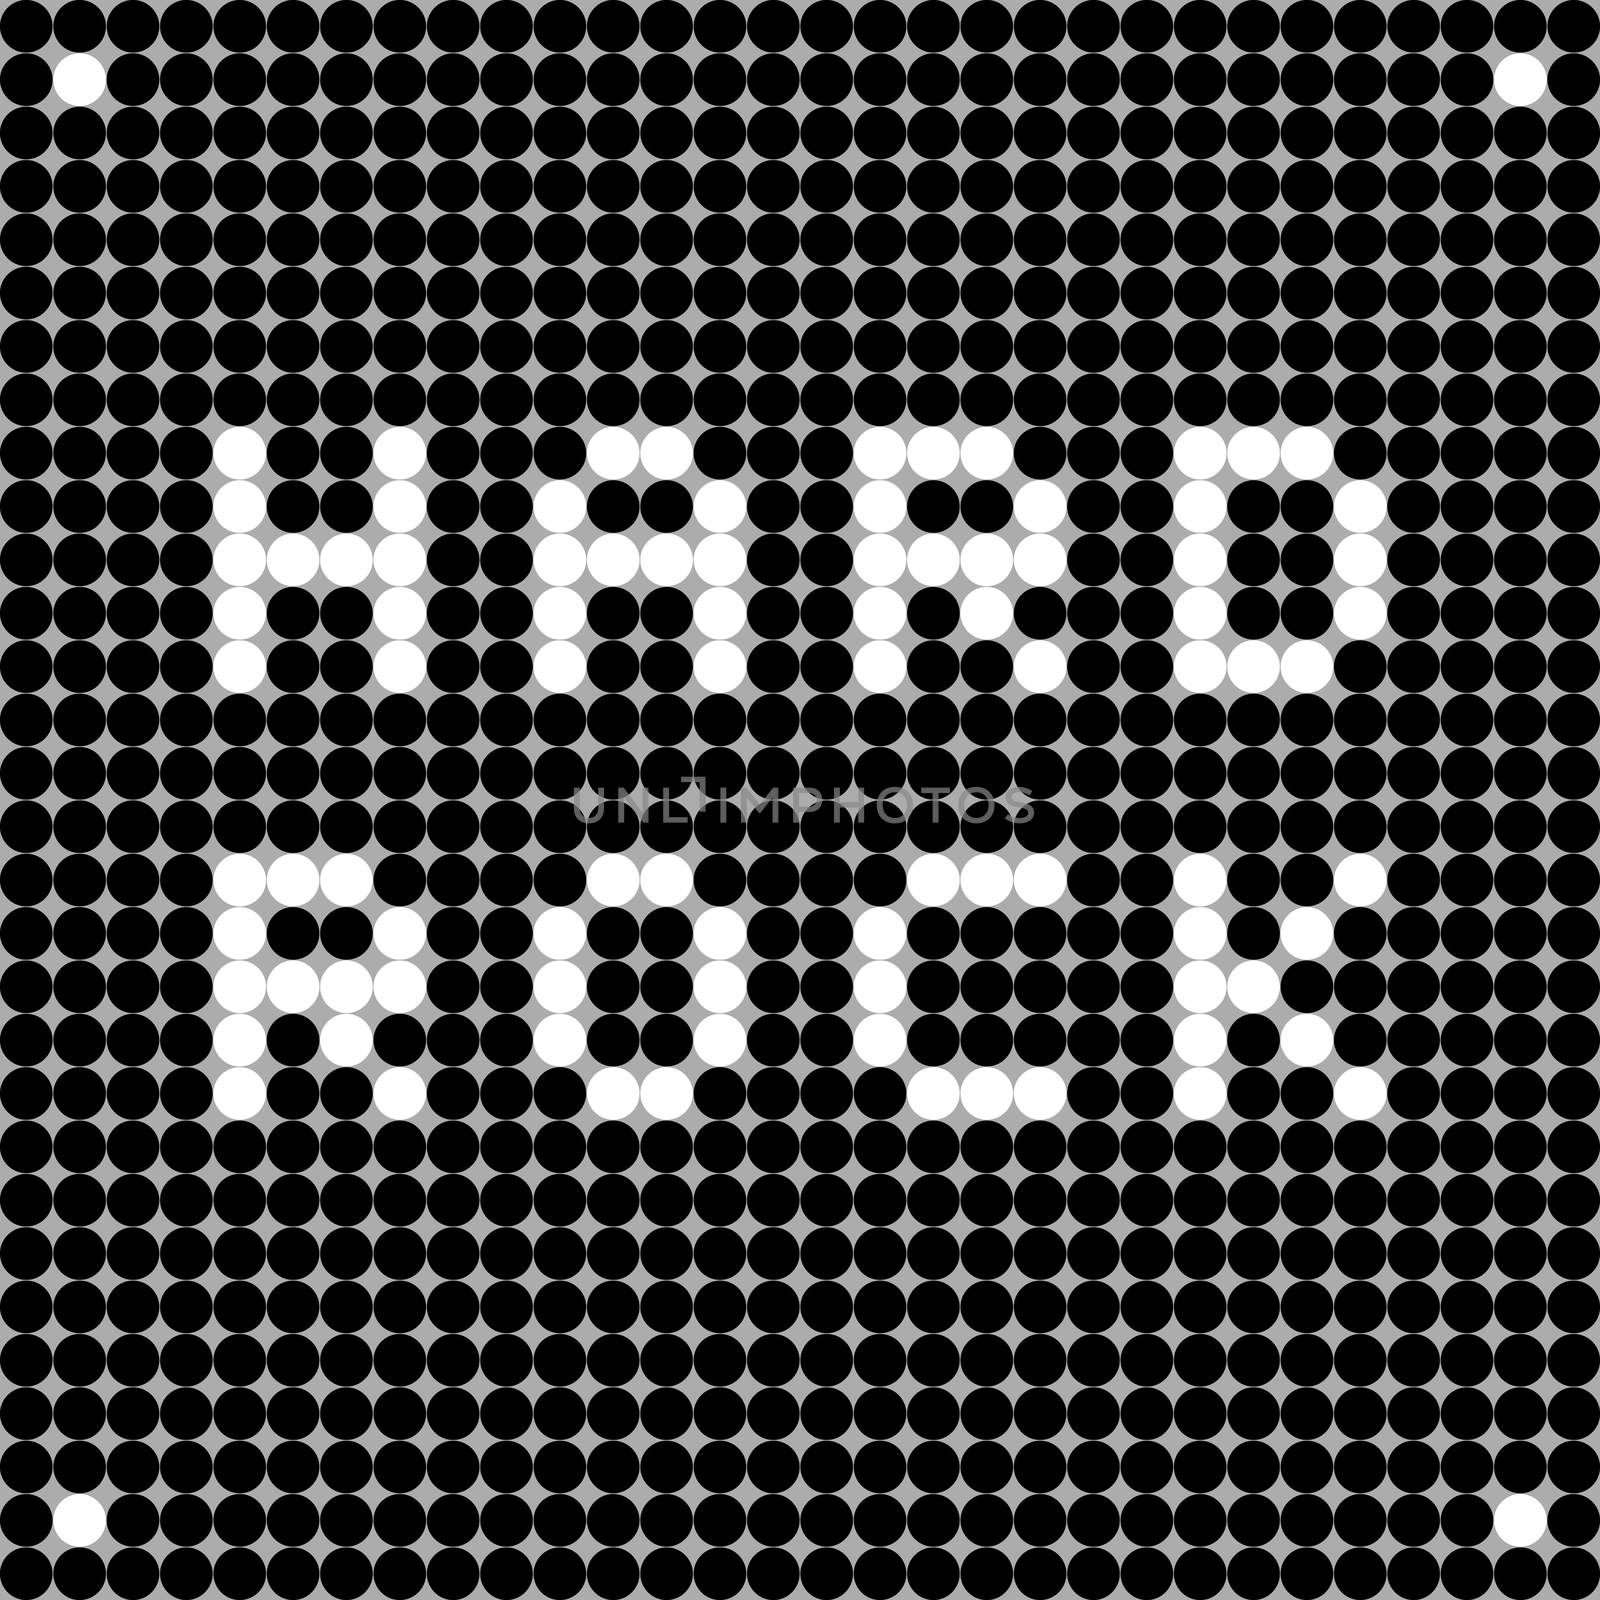 hard rock dots by catacos